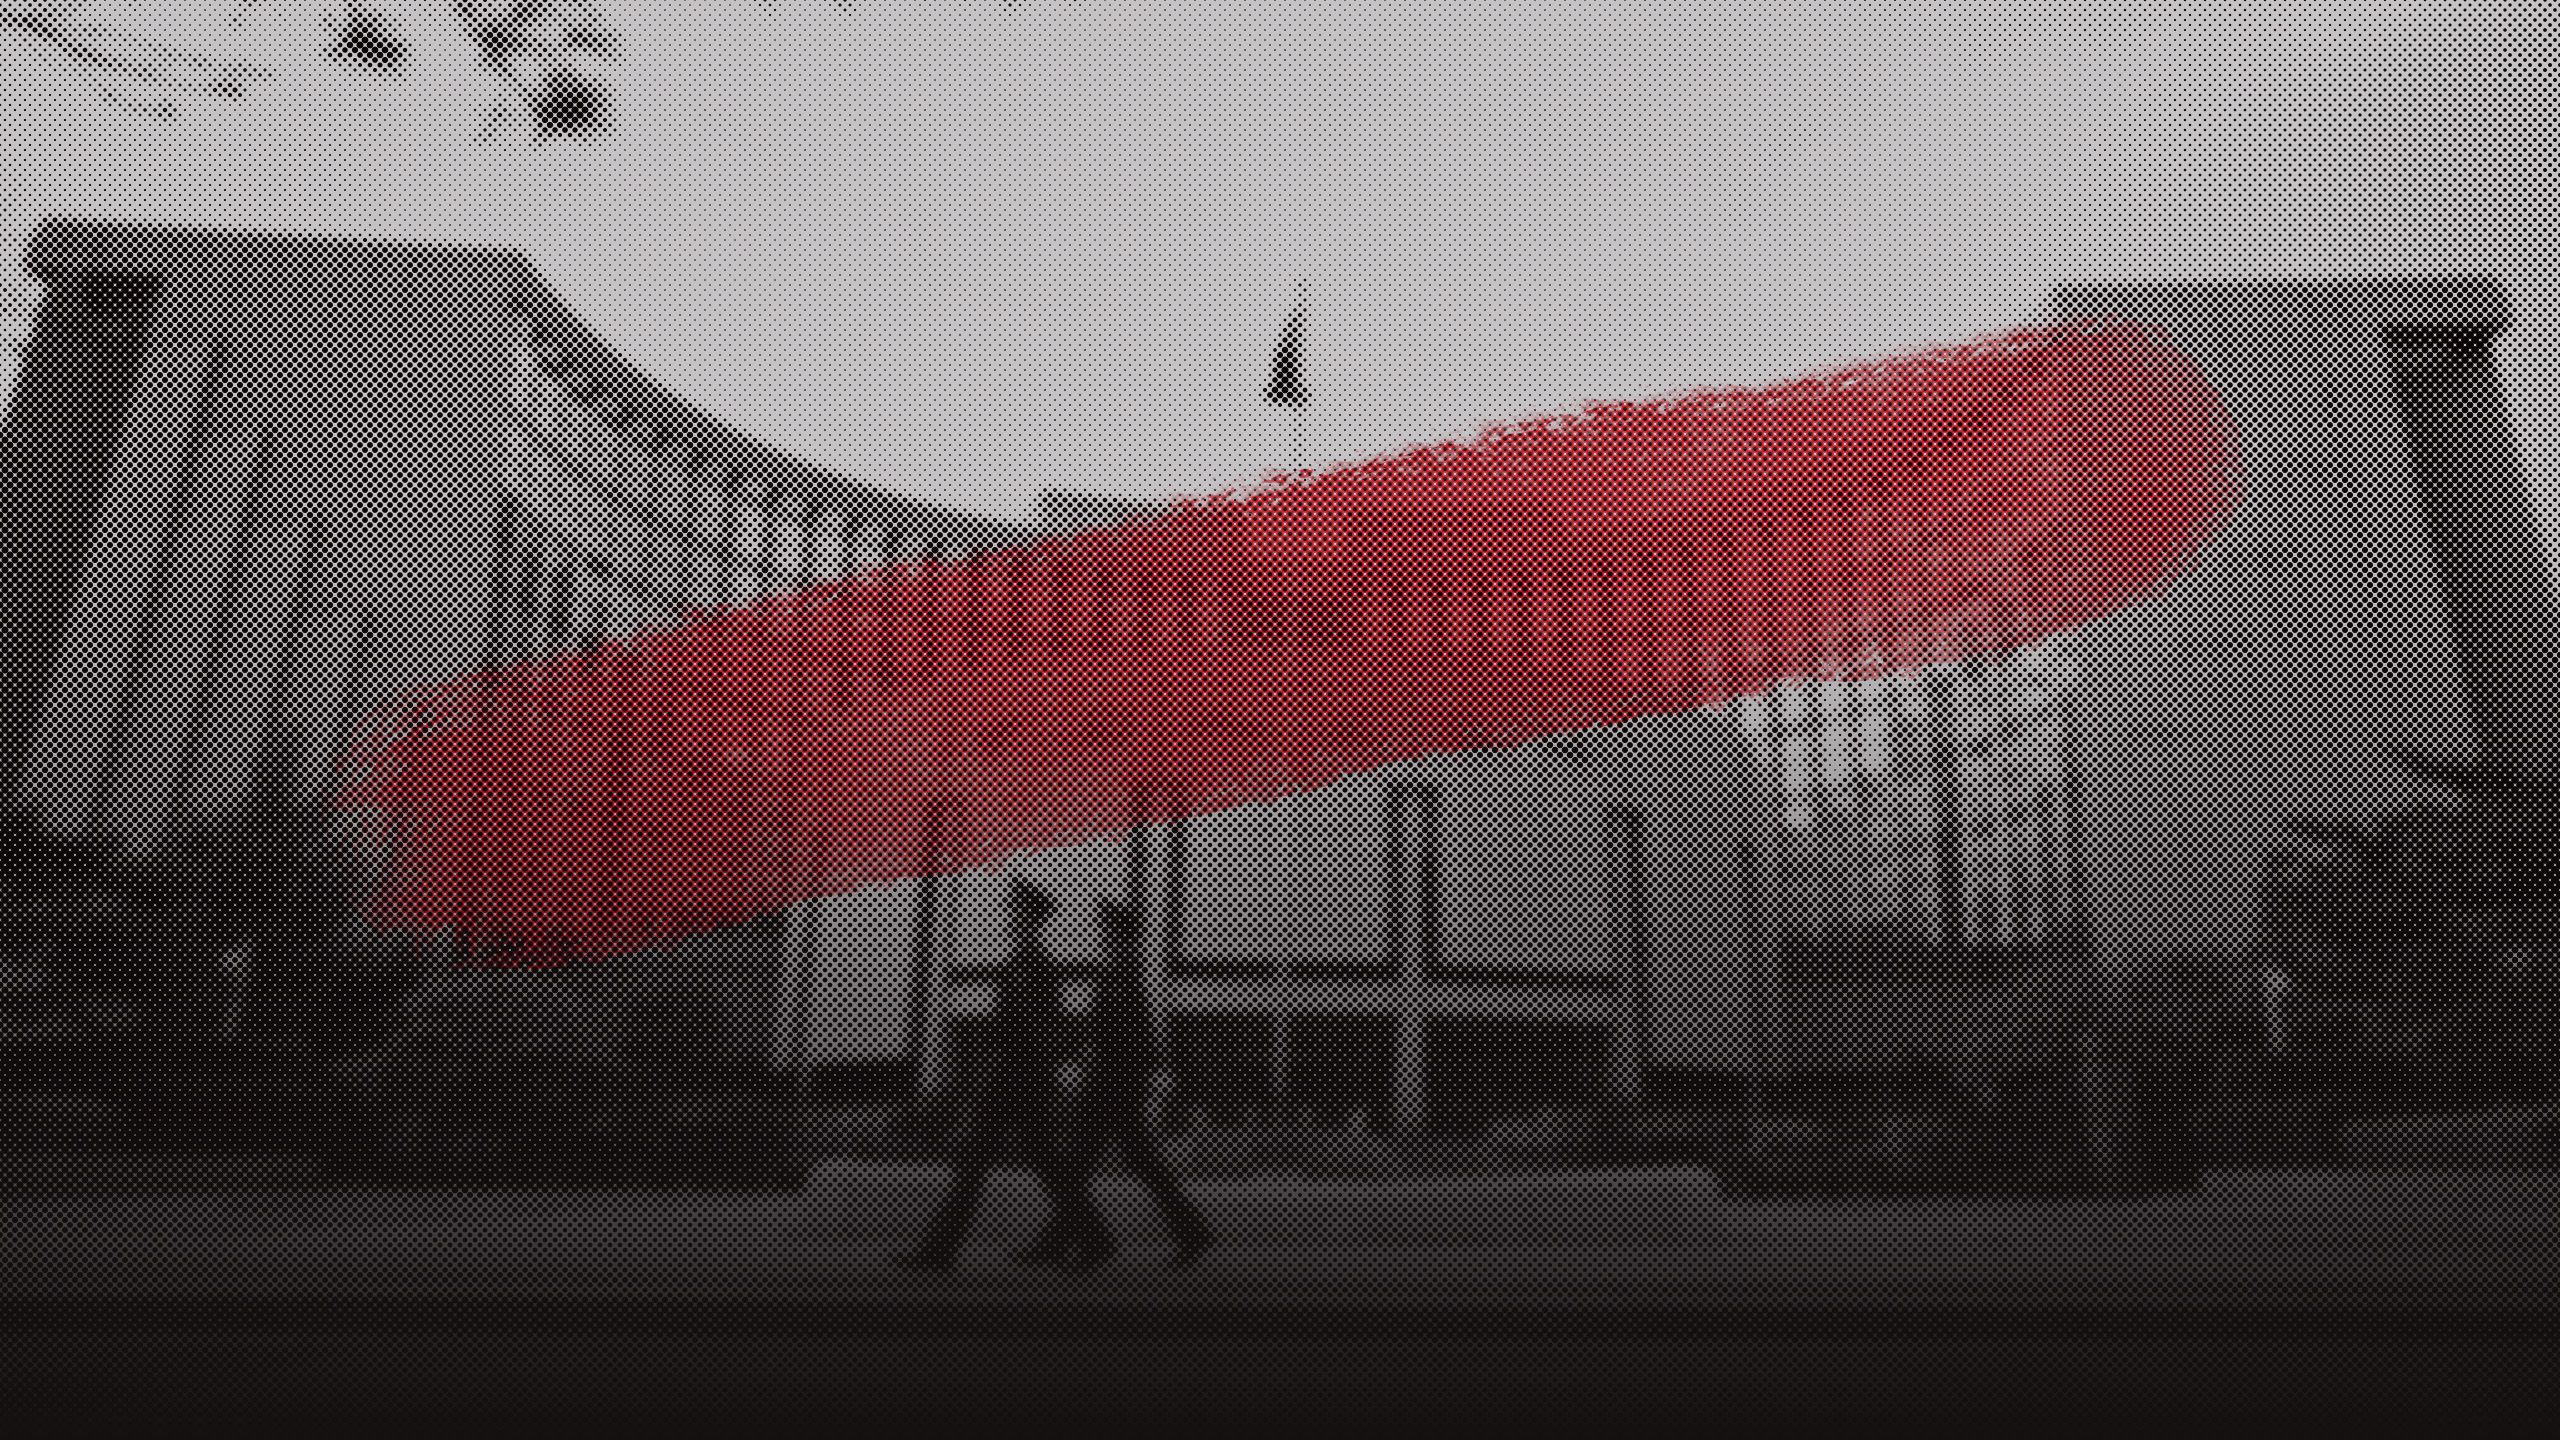 A stylized photo of The People's Bank Of China (PBOC) in Beijing, China.